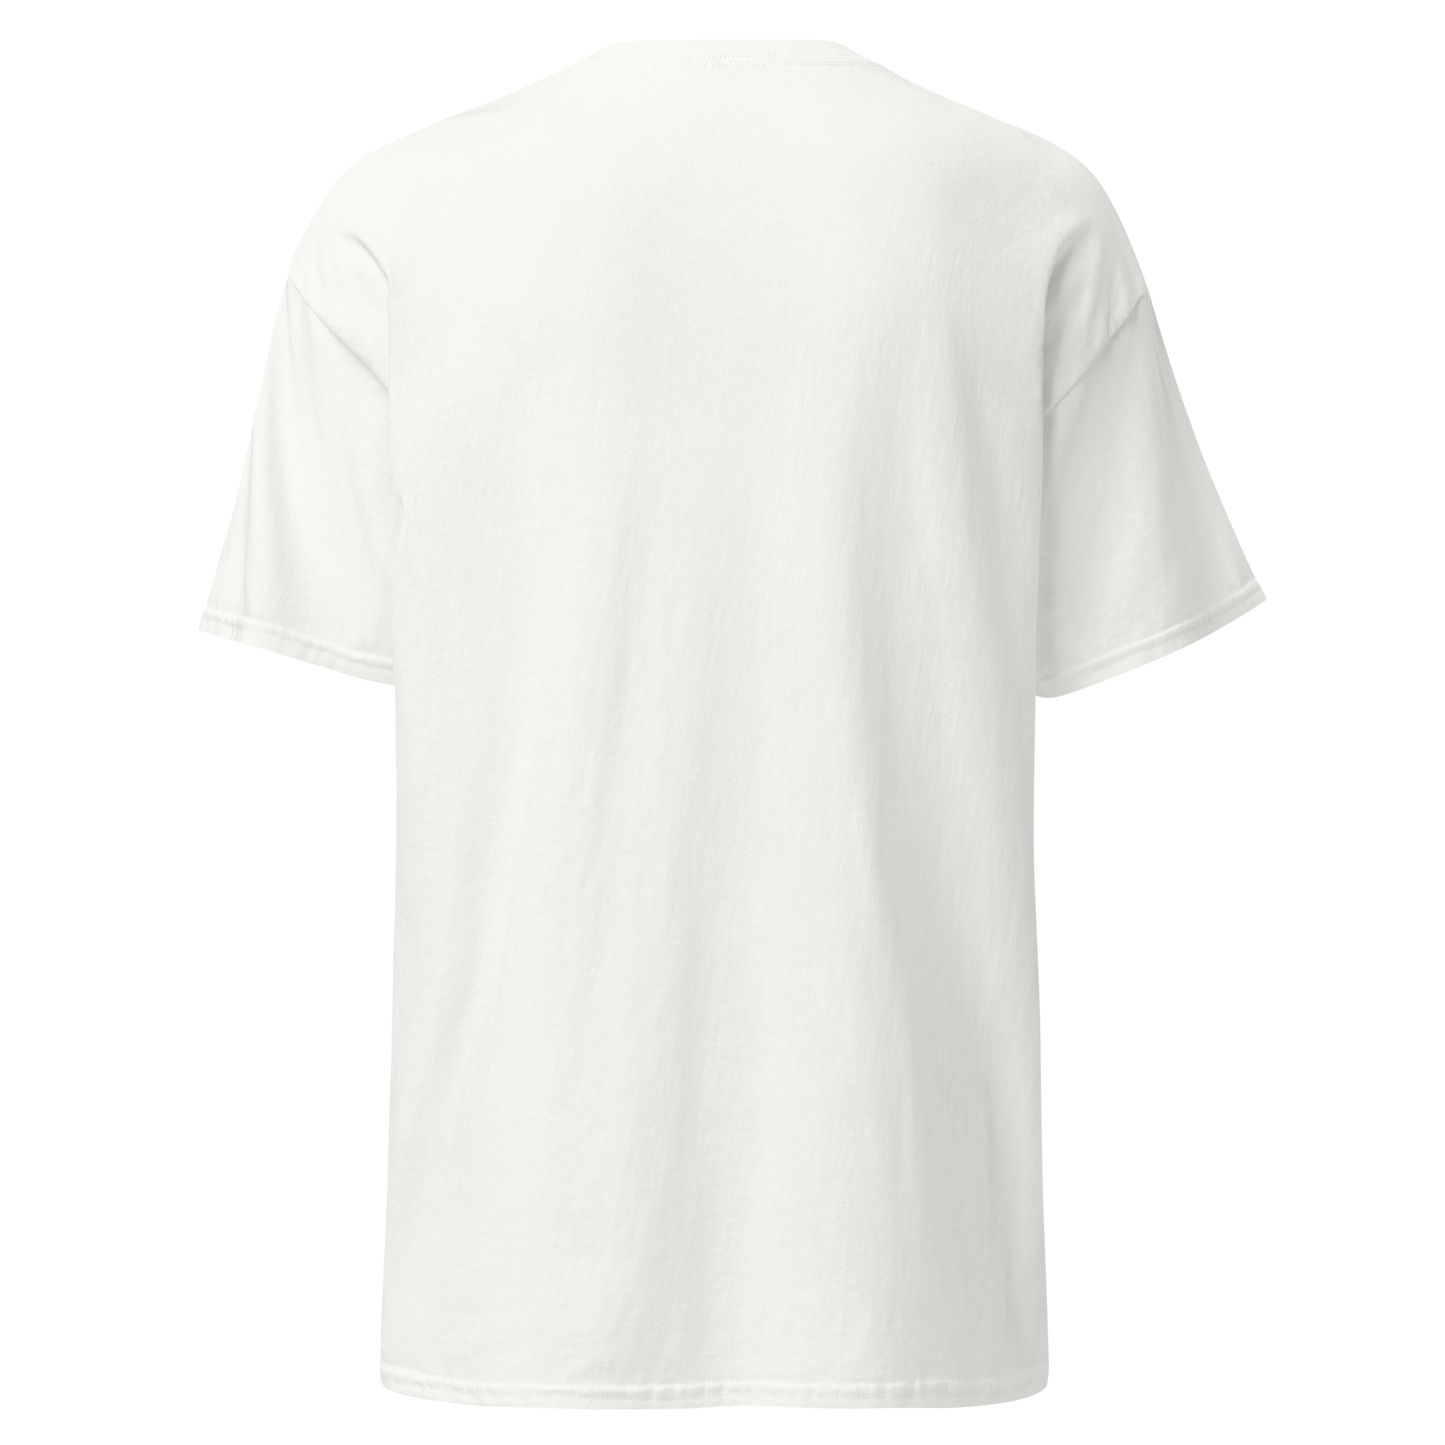 Showcase refined style with G&L Fashion Brand’s white T-shirt featuring an embroidered logo. This classic piece combines premium comfort with elegant detailing. Elevate your casual look with the distinctive touch of G&L Fashion Brand.